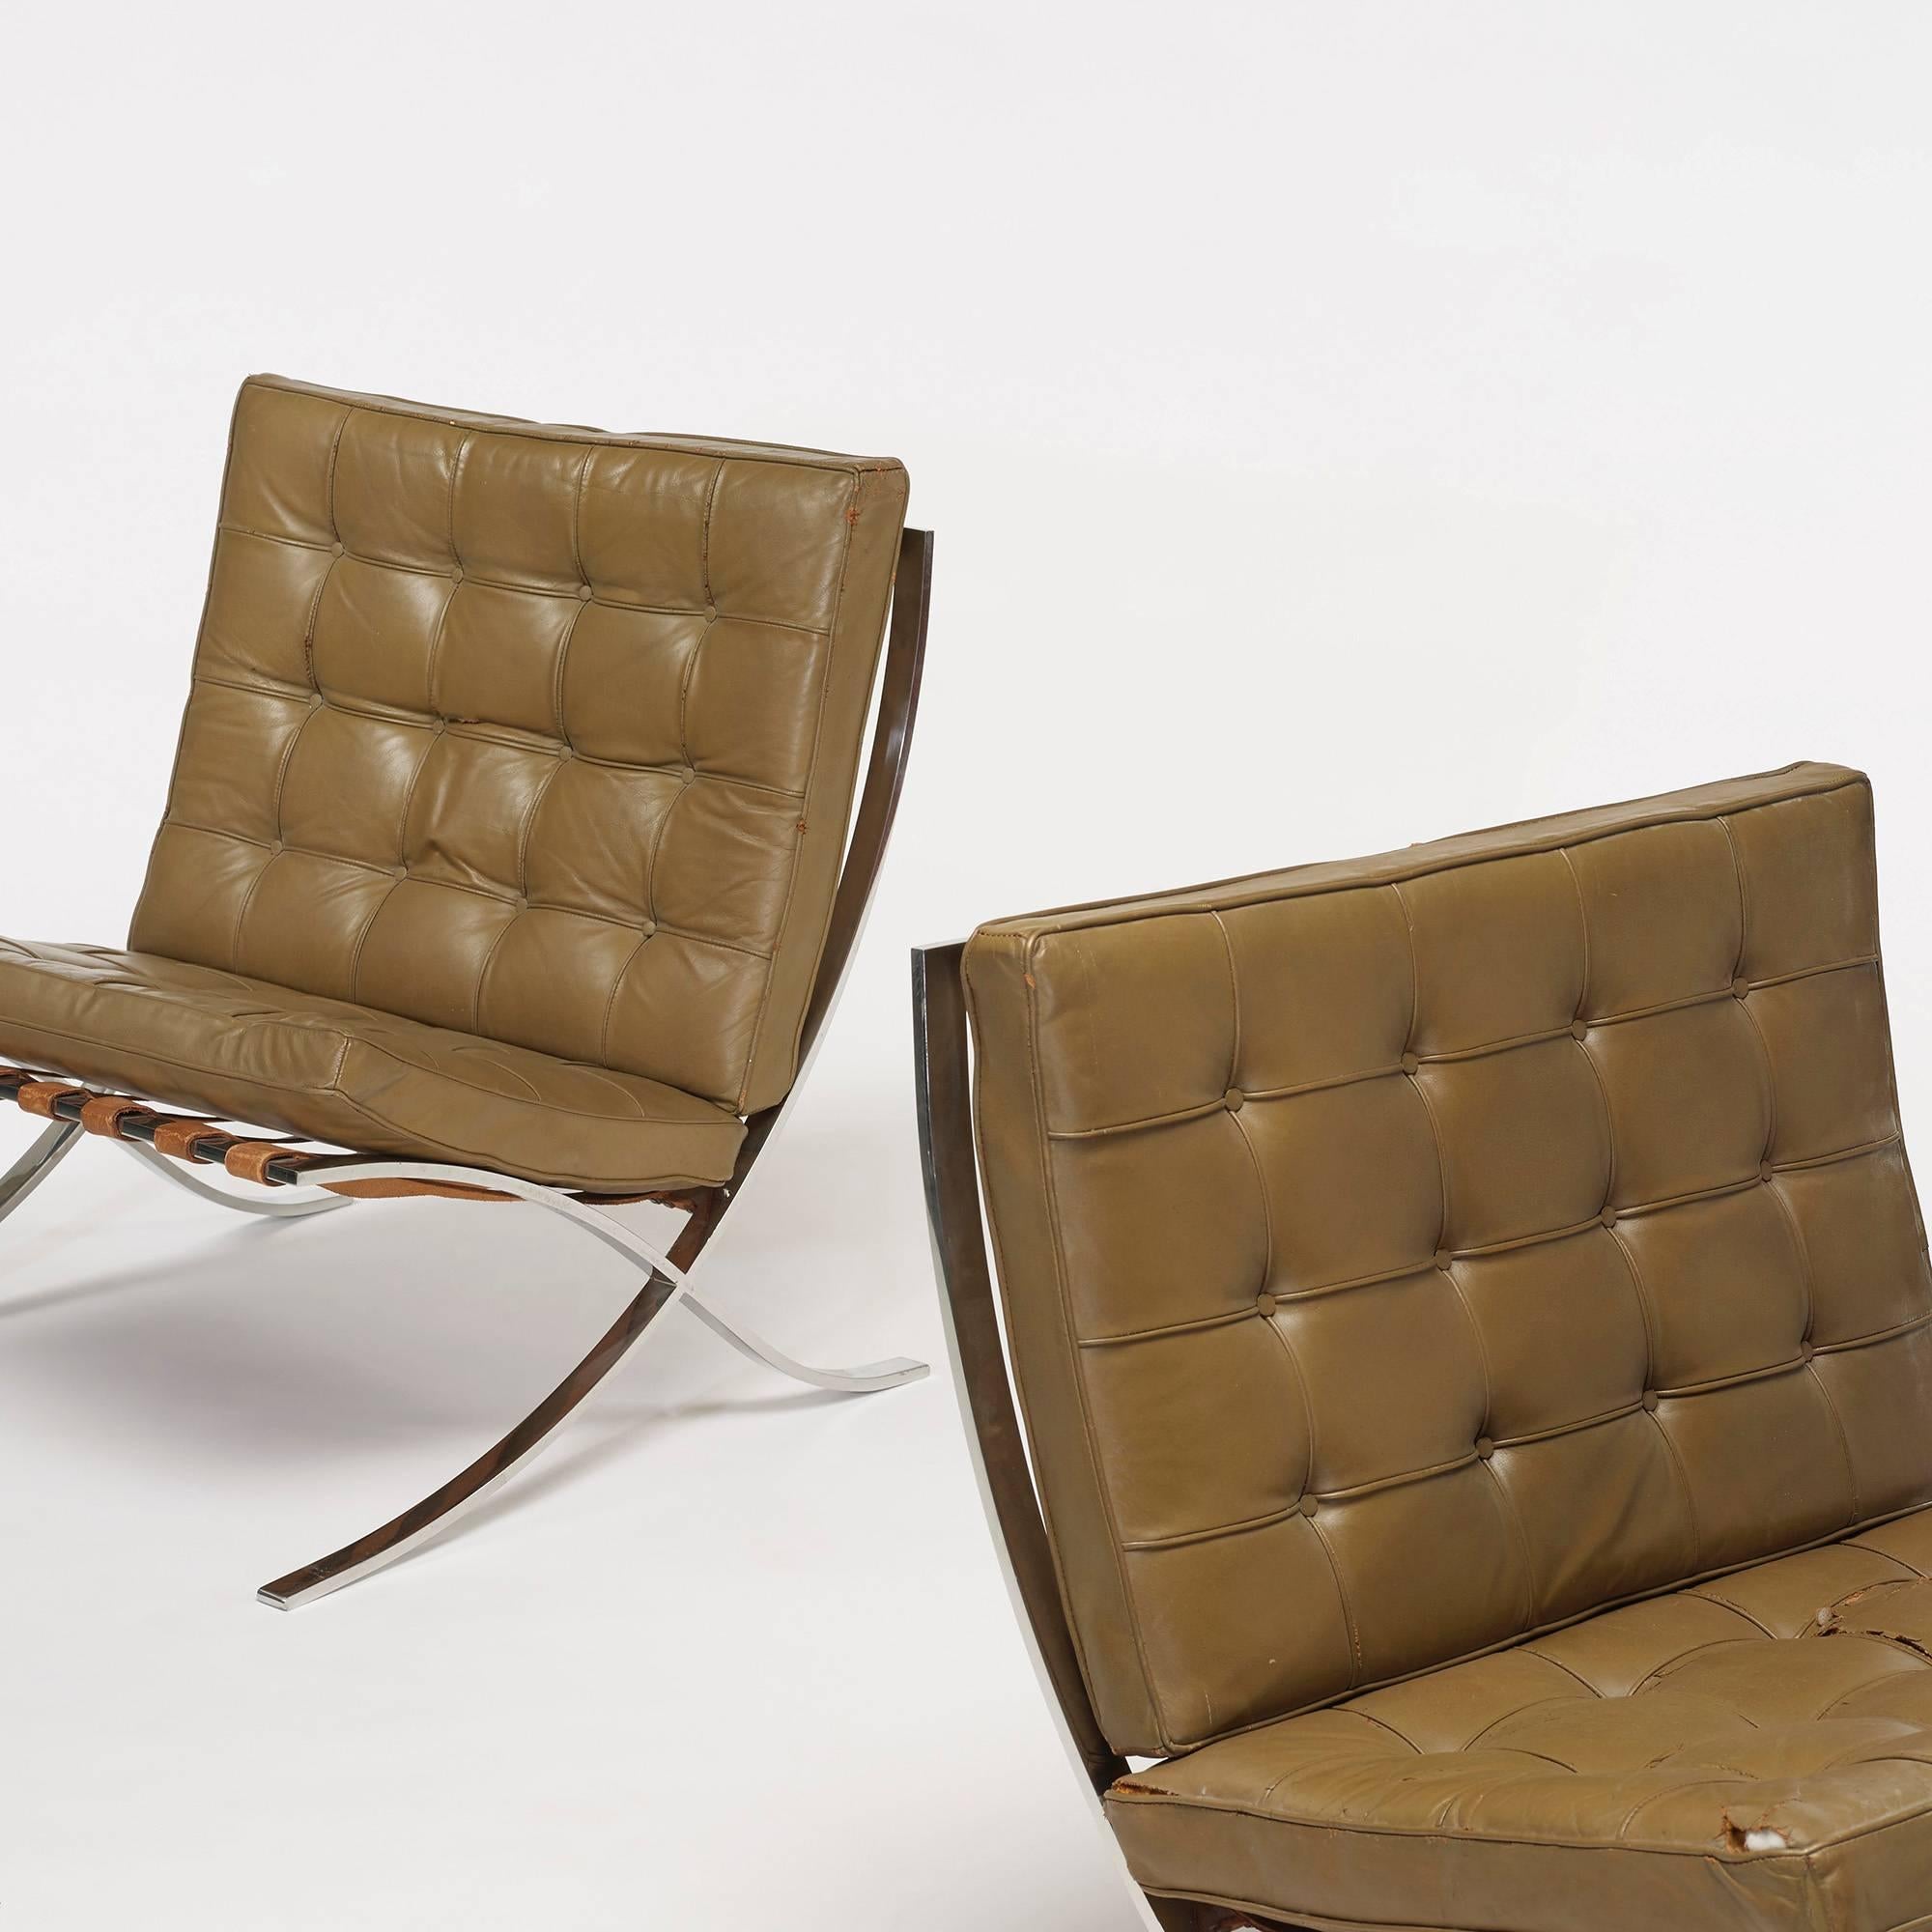 Barcelona Chairs, Pair by Ludwig Mies van der Rohe for Gerald R. Griffith In Good Condition For Sale In Chicago, IL